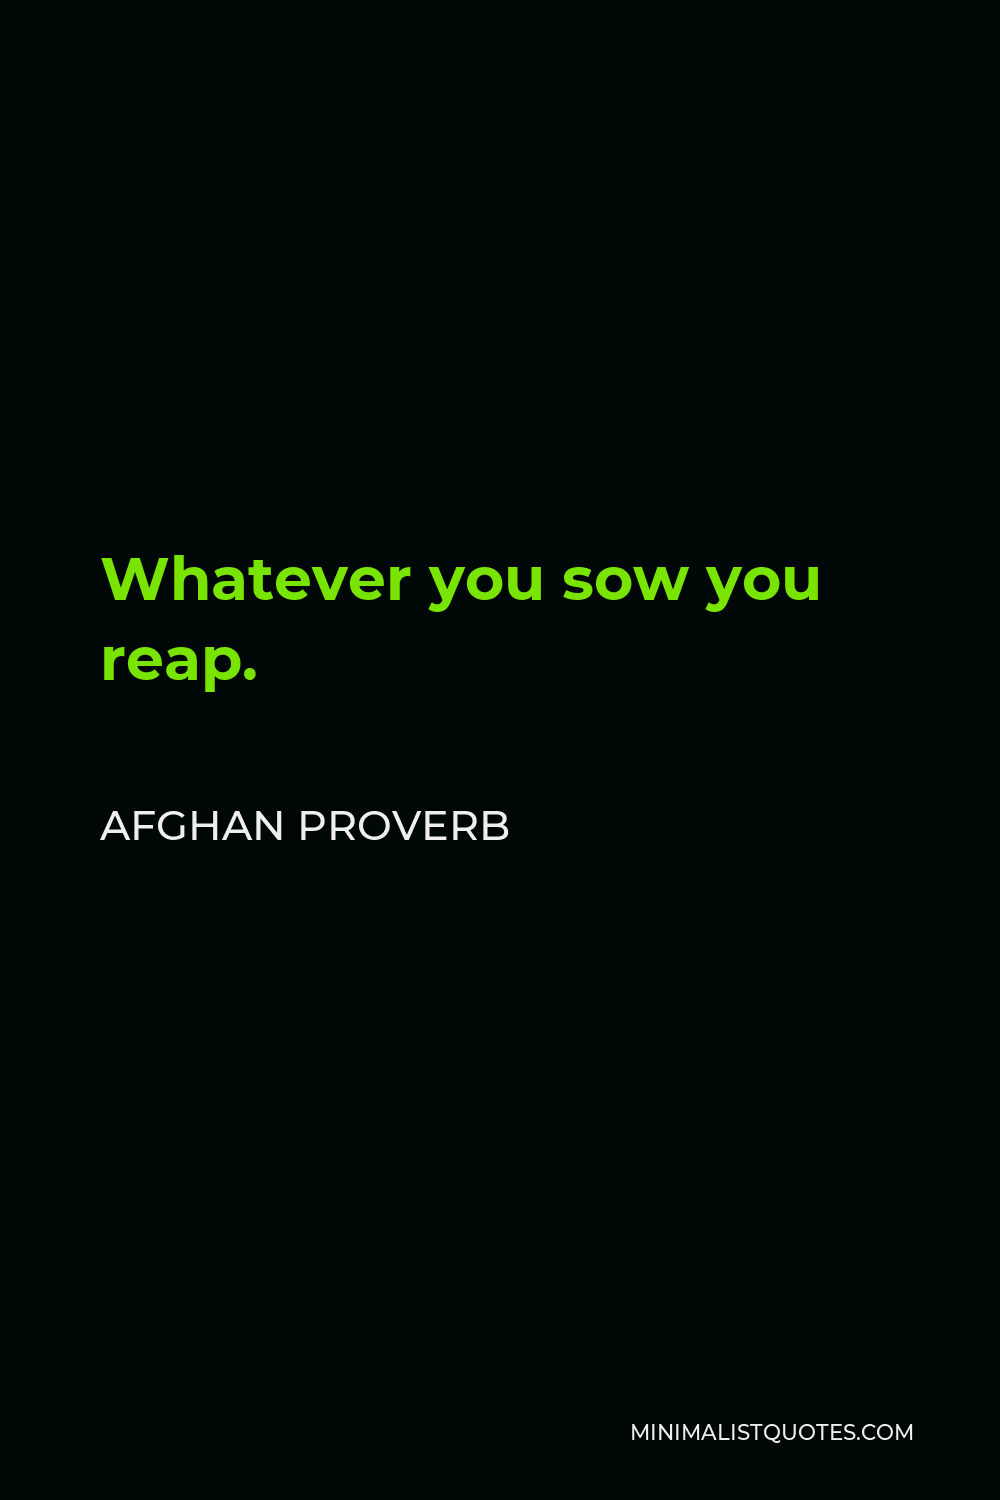 Afghan Proverb Quote - Whatever you sow you reap.